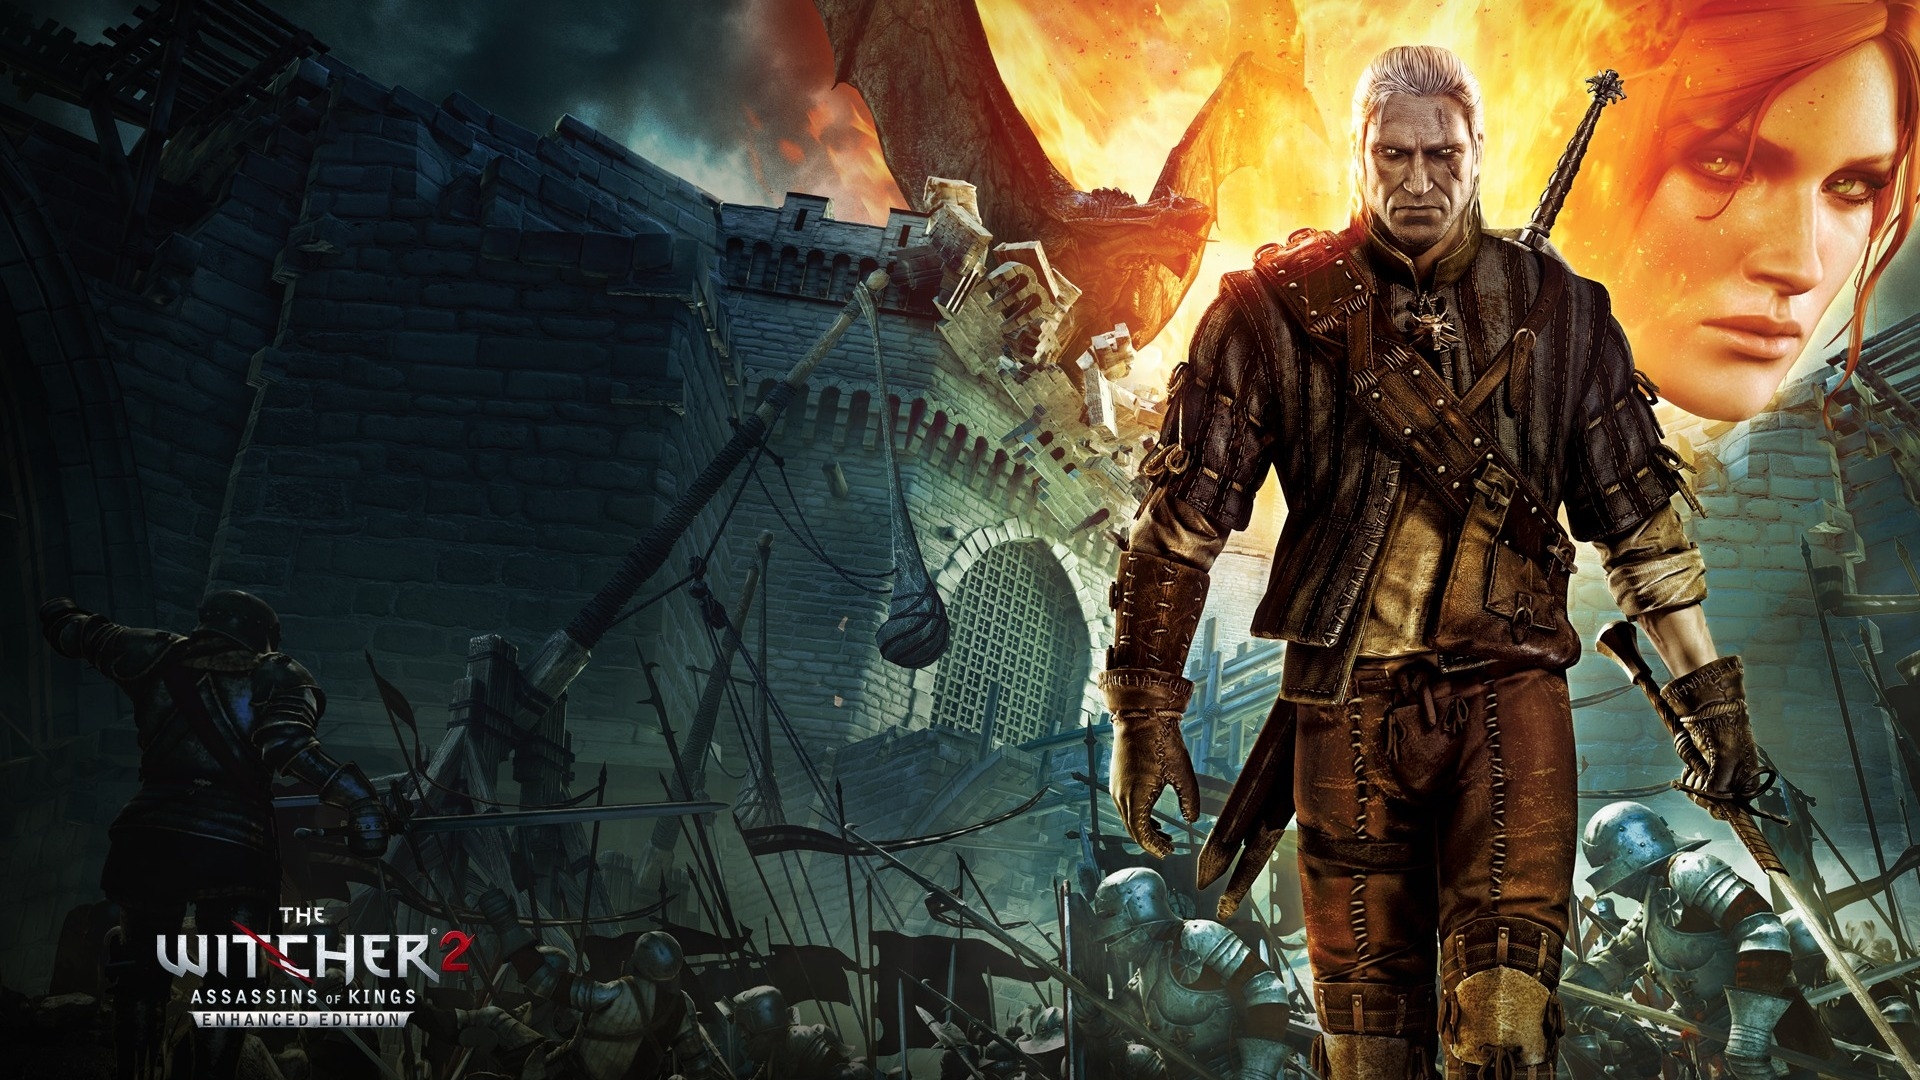 The Witcher 2 Assassins of Kings PC Game for 1920 x 1080 HDTV 1080p resolution